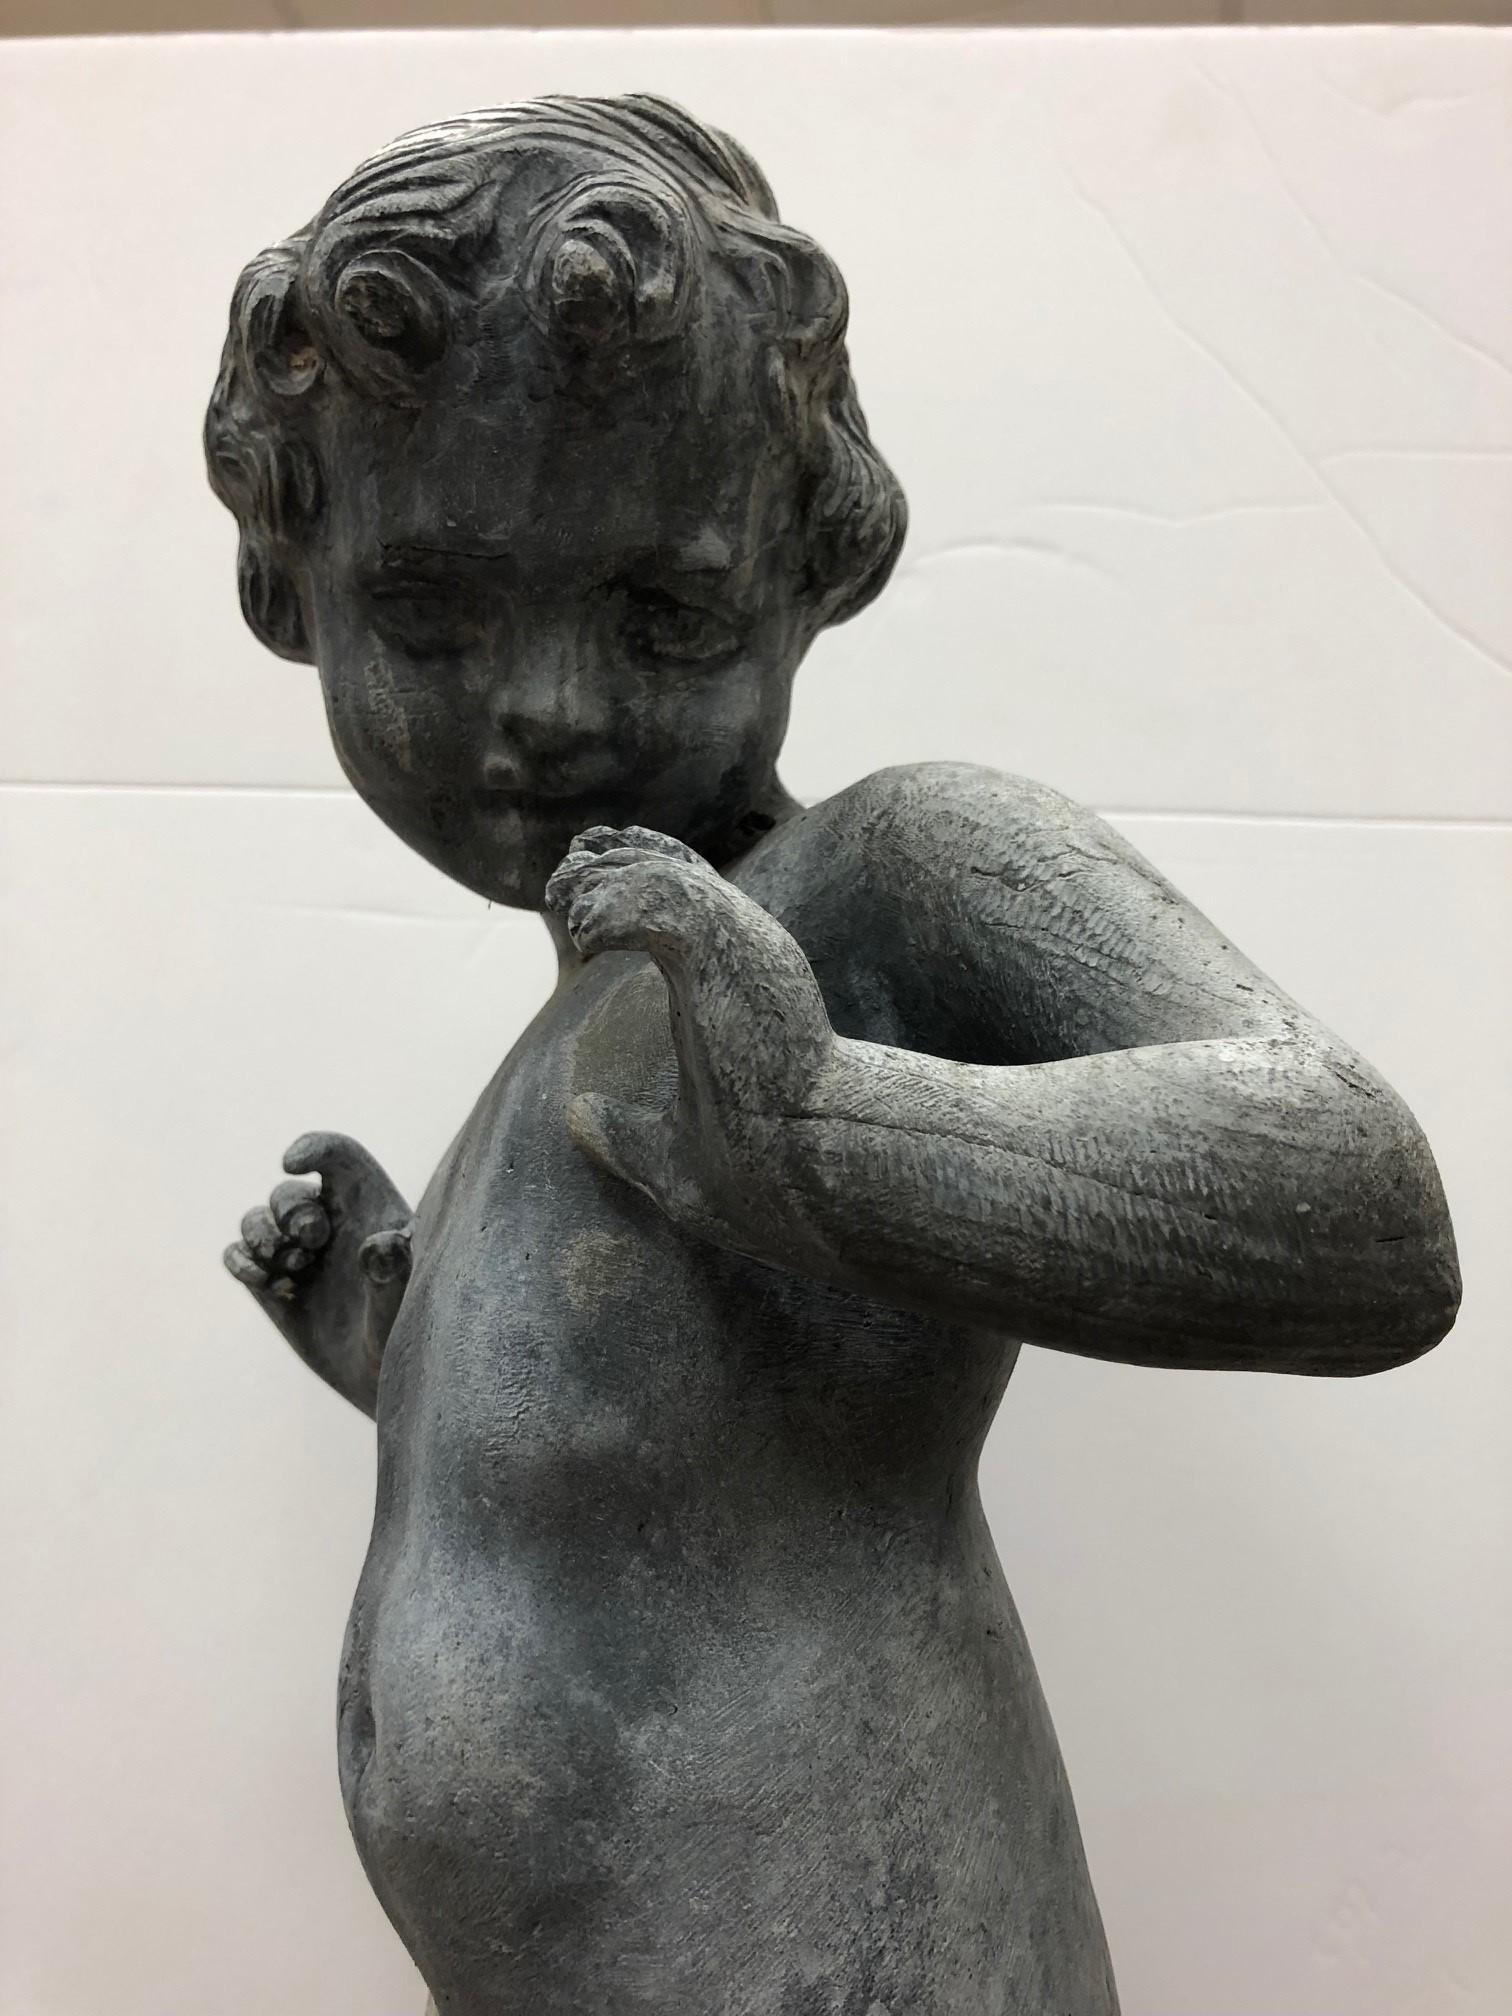 Statue of a young boy dancing made of lead by Kenneth Lynch and Sons' This is a beautiful statue of a young boy dancing and the details are amazing. He would look fantastic standing in a garden, edge of a pond or on top of a fountain.